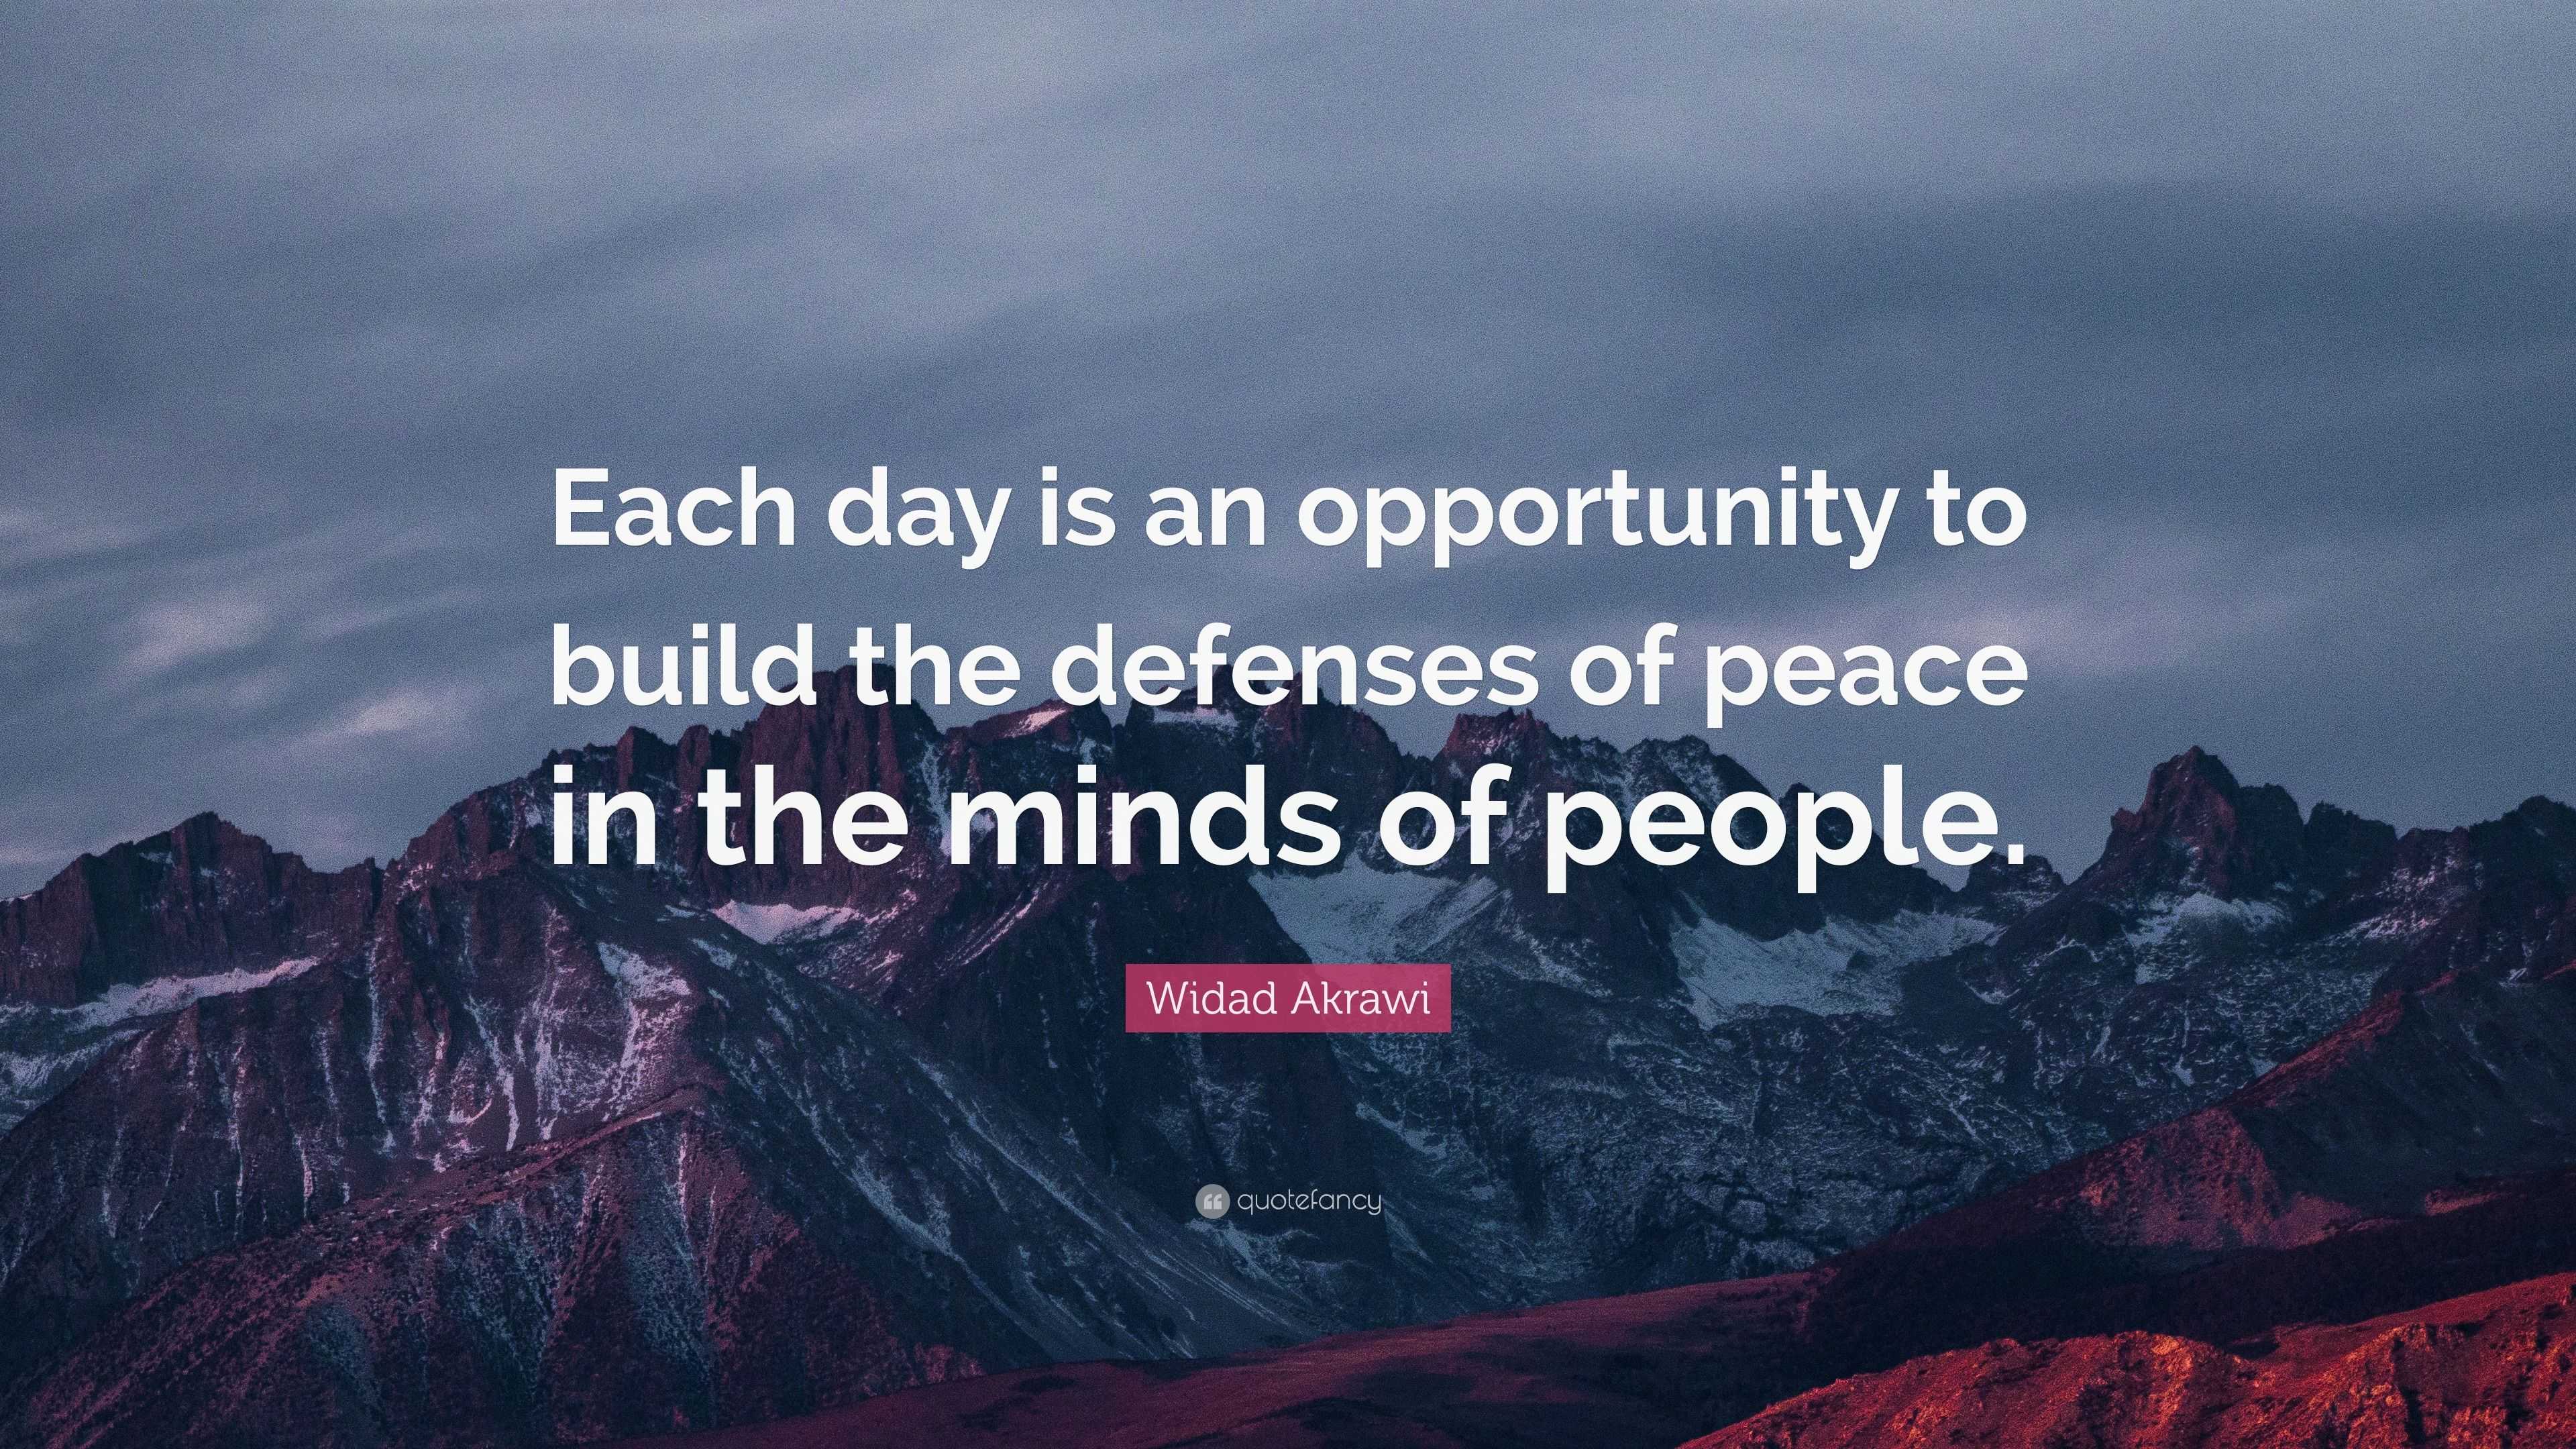 Widad Akrawi Quote: “Each day is an opportunity to build the defenses ...